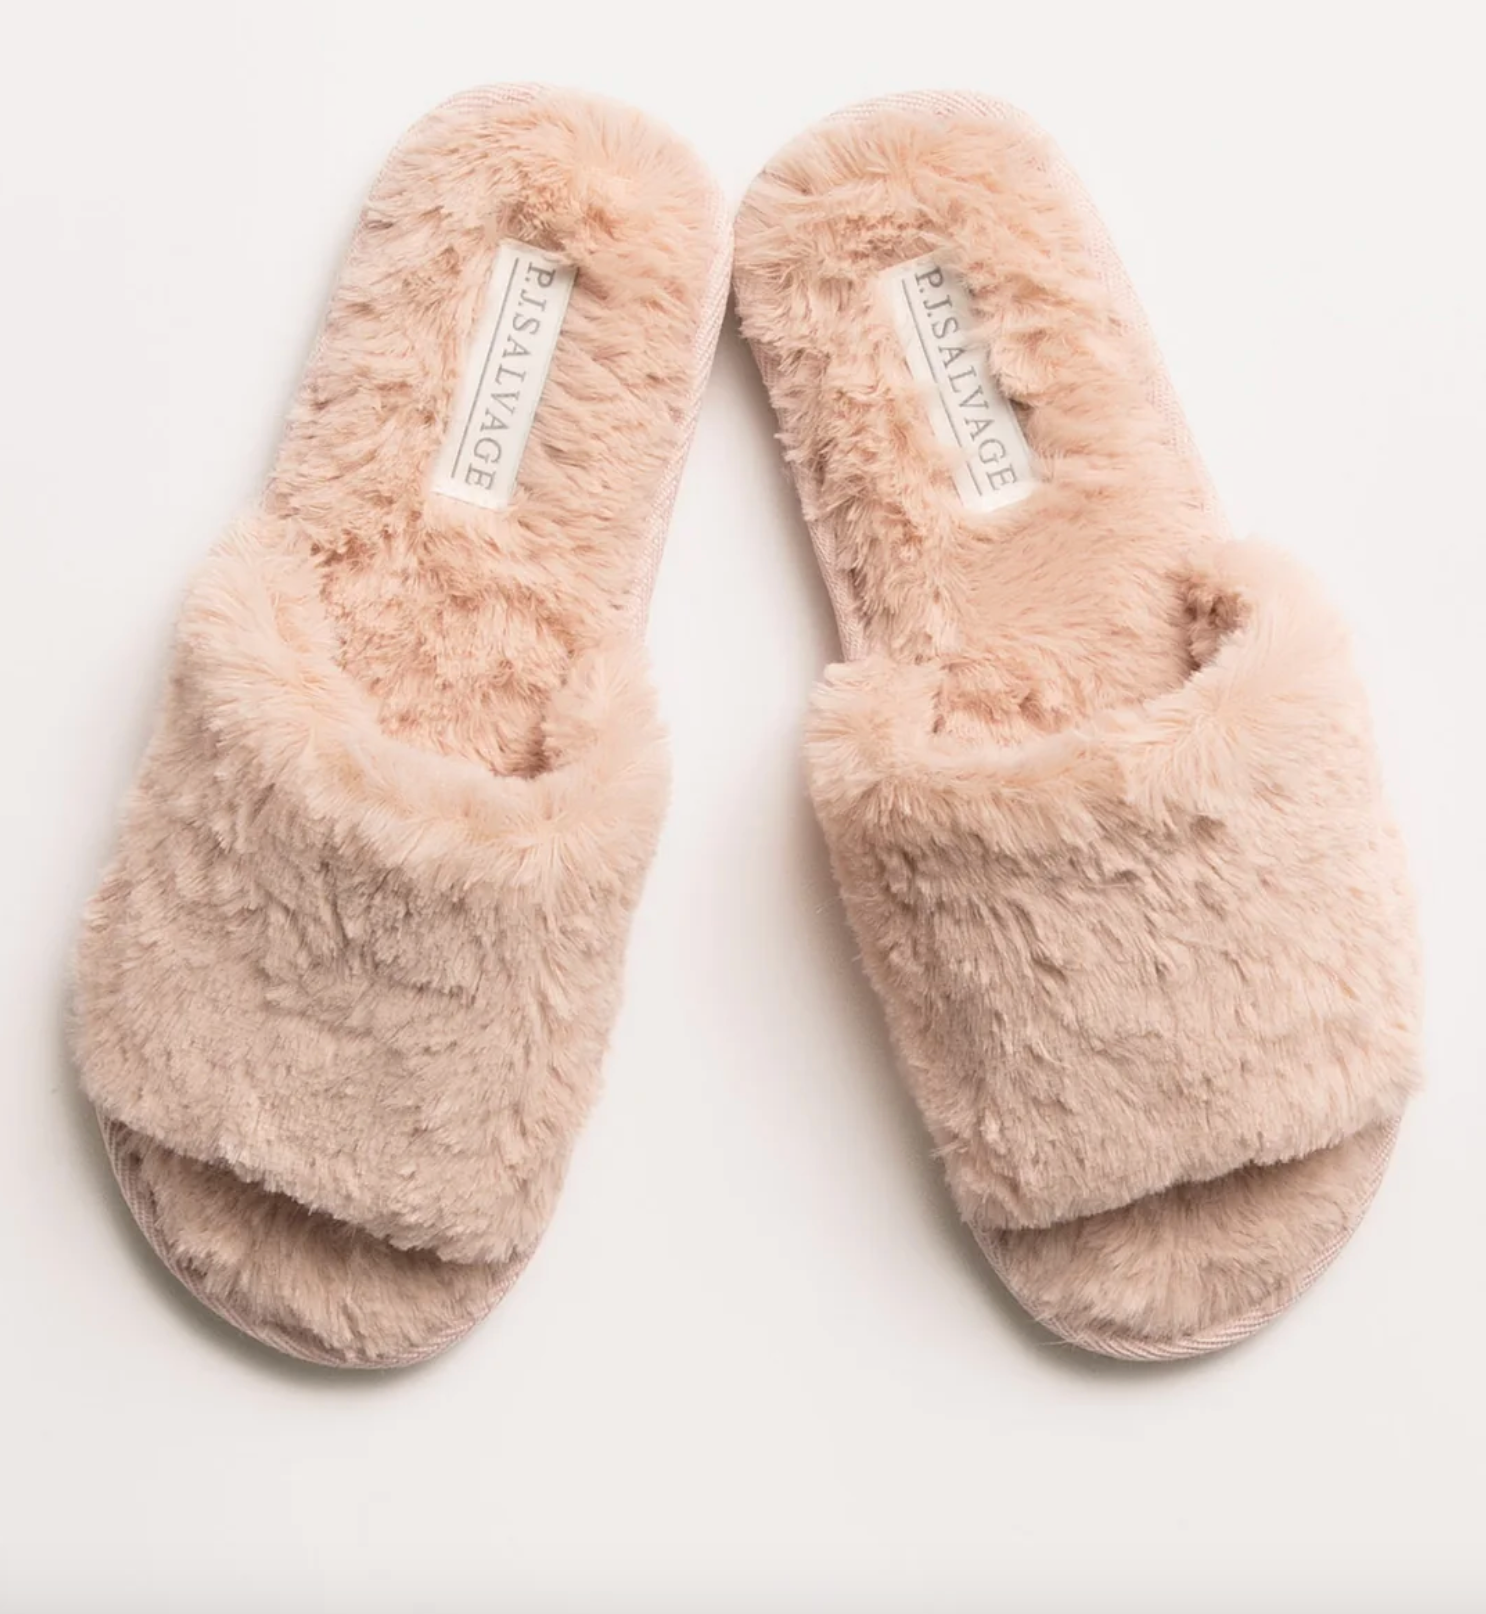 Blush Luxe Plush Slippers